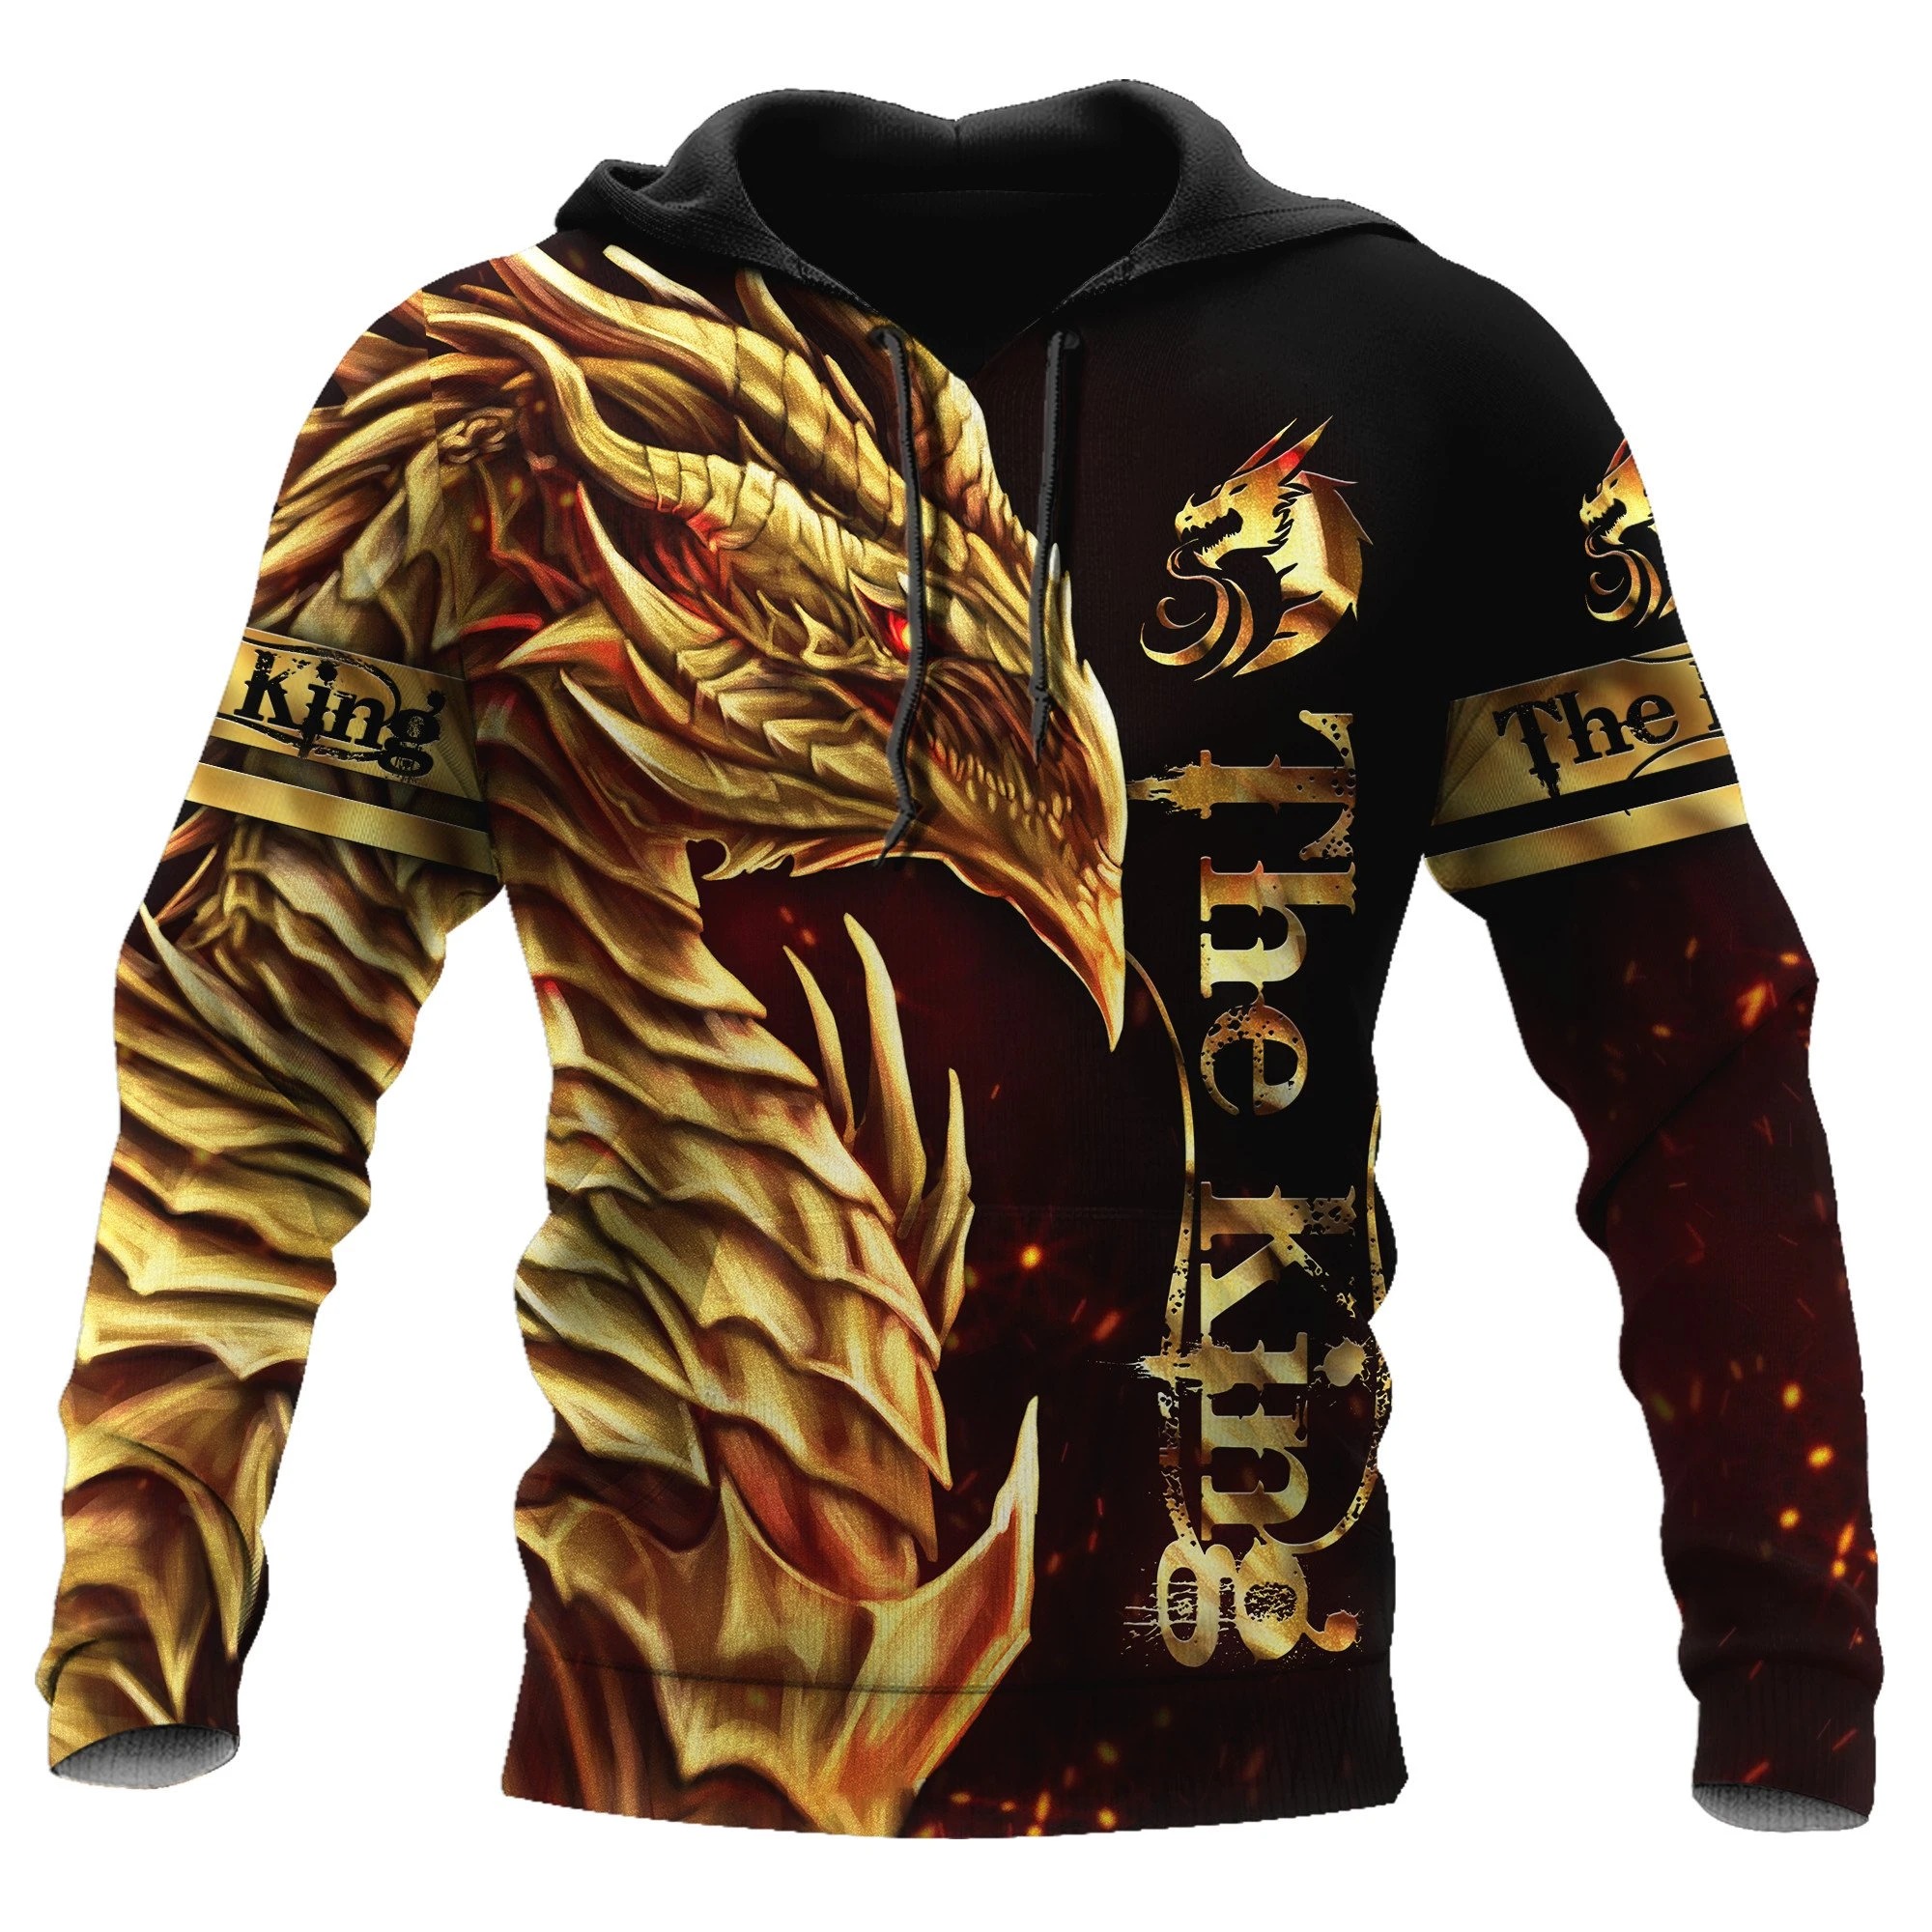 Dragon King 3D All Over Printed Unisex Shirts – Hothot 150321